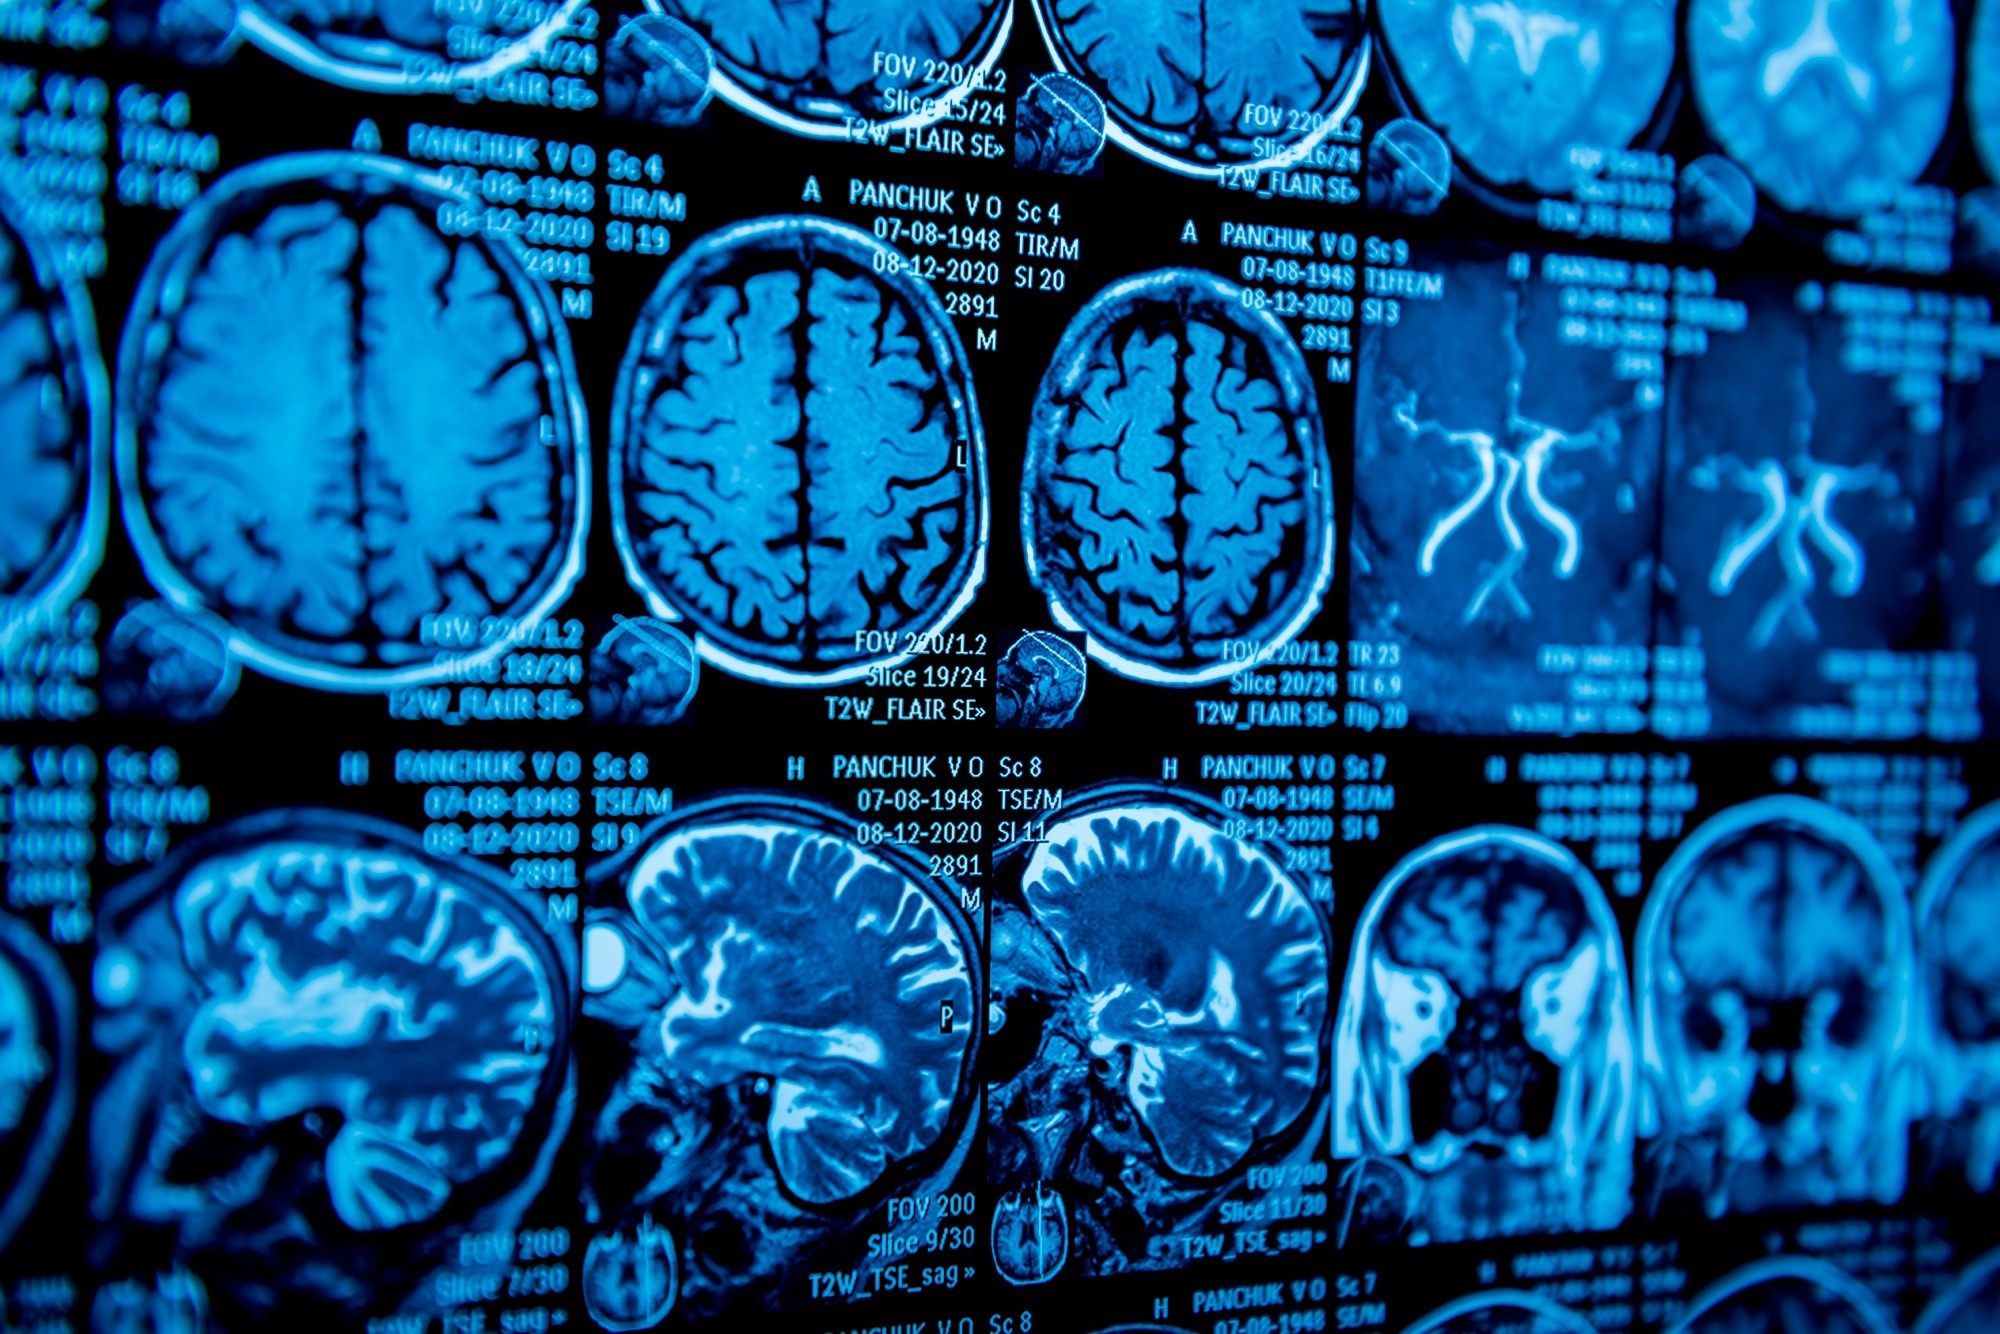 Study: Larger gray matter volumes in neuropsychiatric long-COVID syndrome. Image Credit: Roman Zaiets / Shutterstock